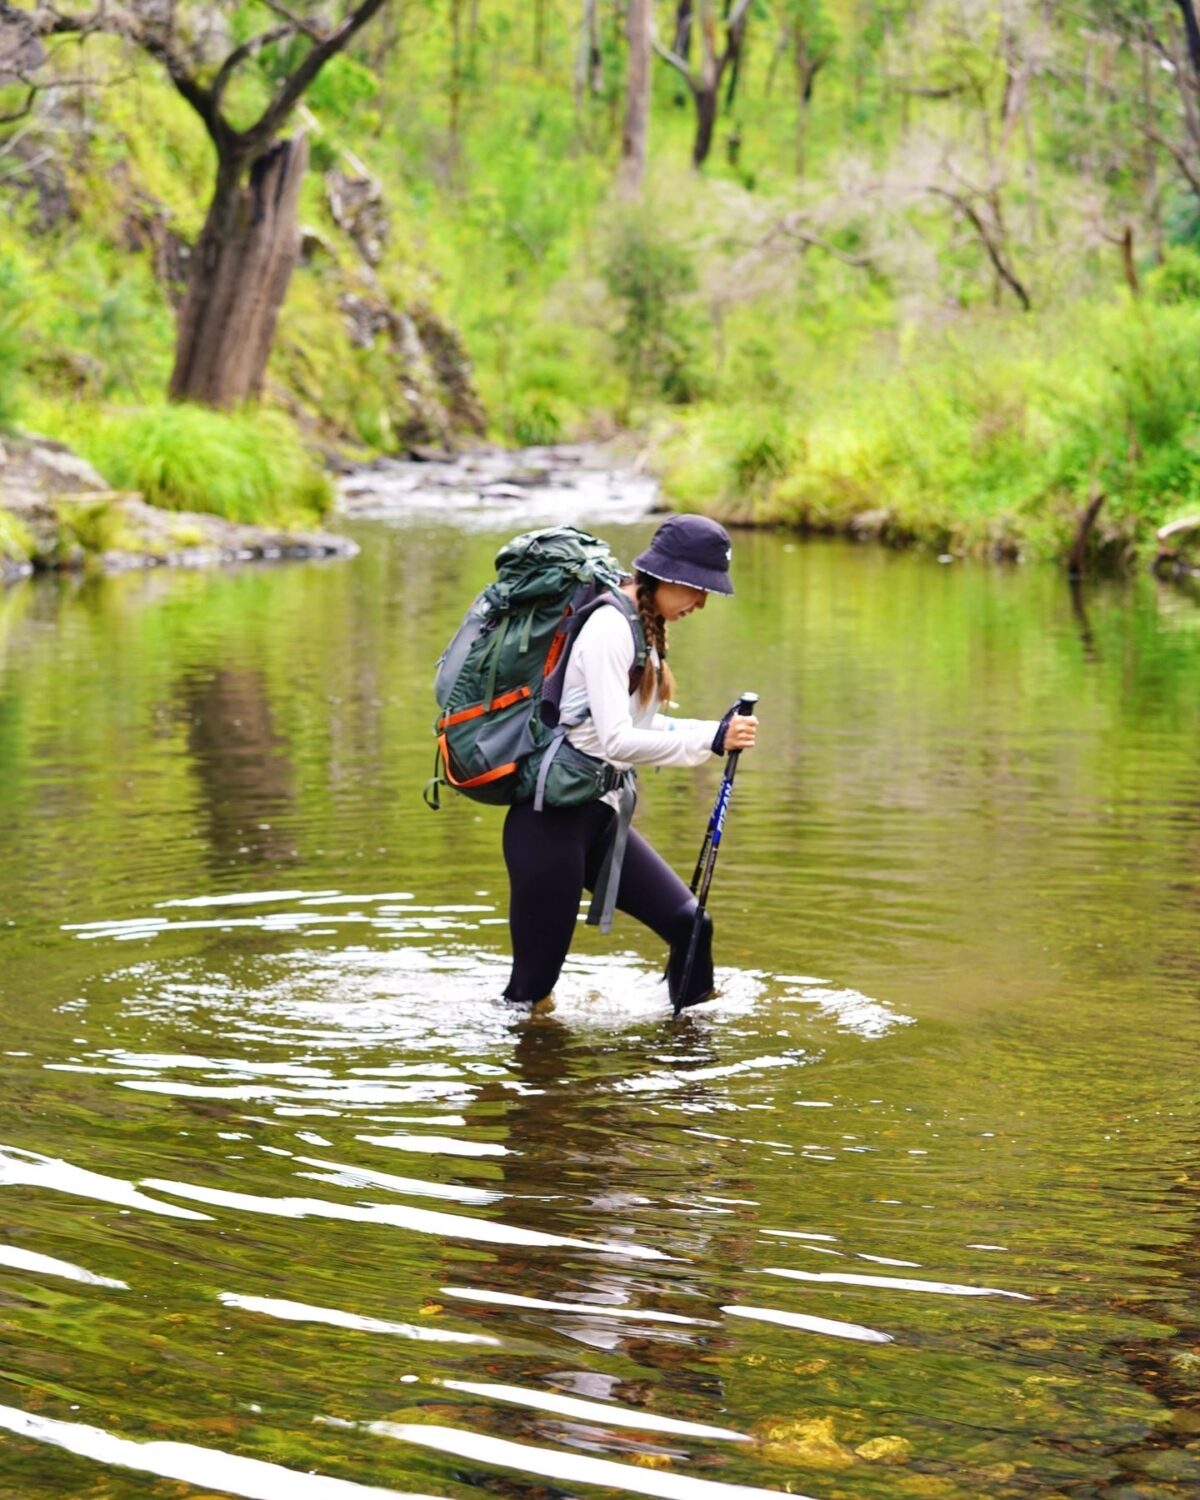 Woman crossing river, Green Gully track, Oxley Wild Rivers National Park. Photo credit: Sue Kang / DPE